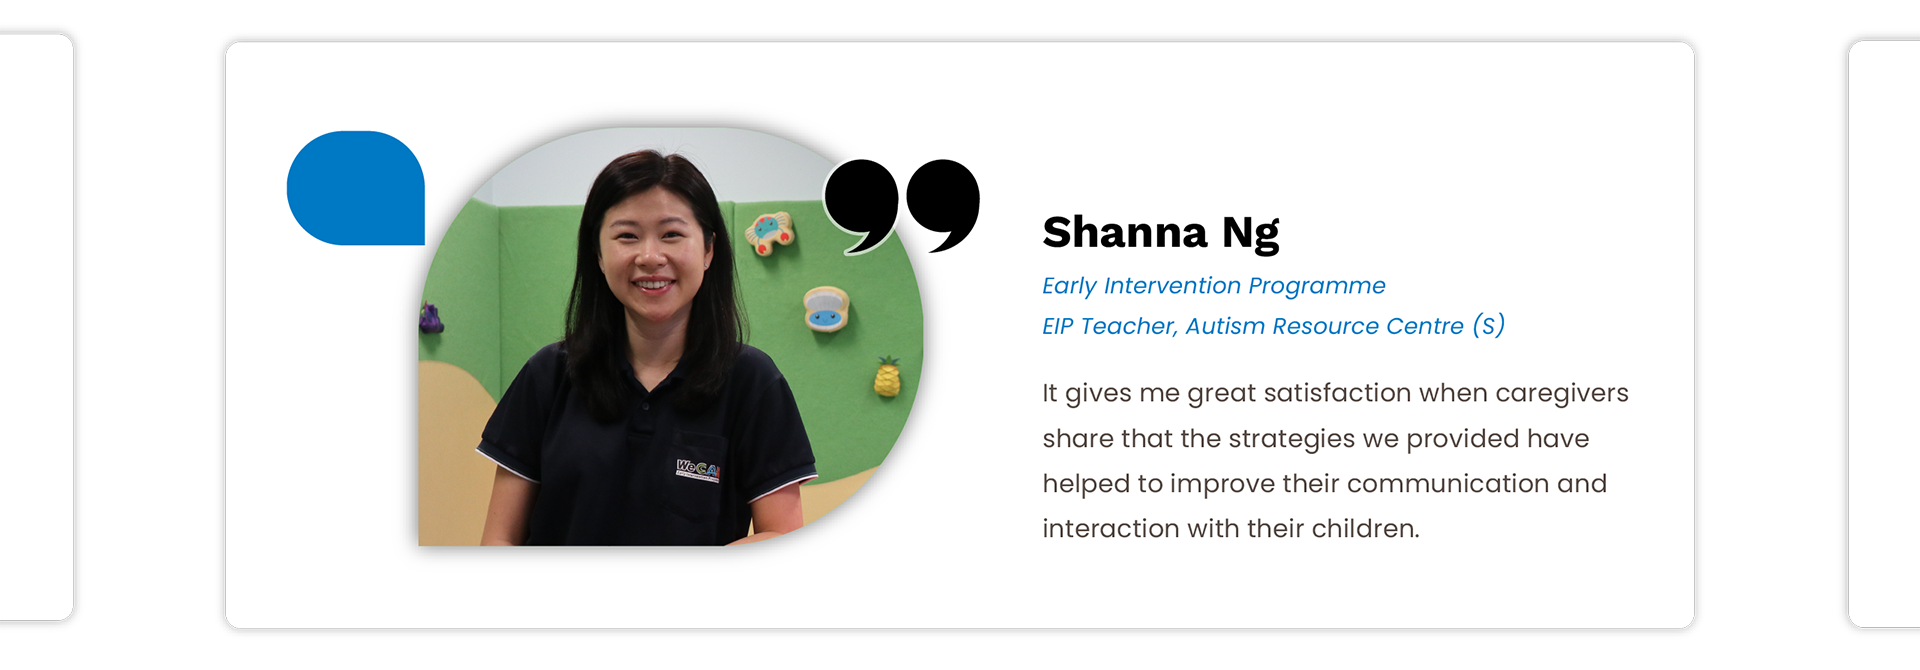 Shanna Ng: It gives me great satisfaction when caregivers 
share that the strategies we provided have helped to improve their communication and interaction with their children.